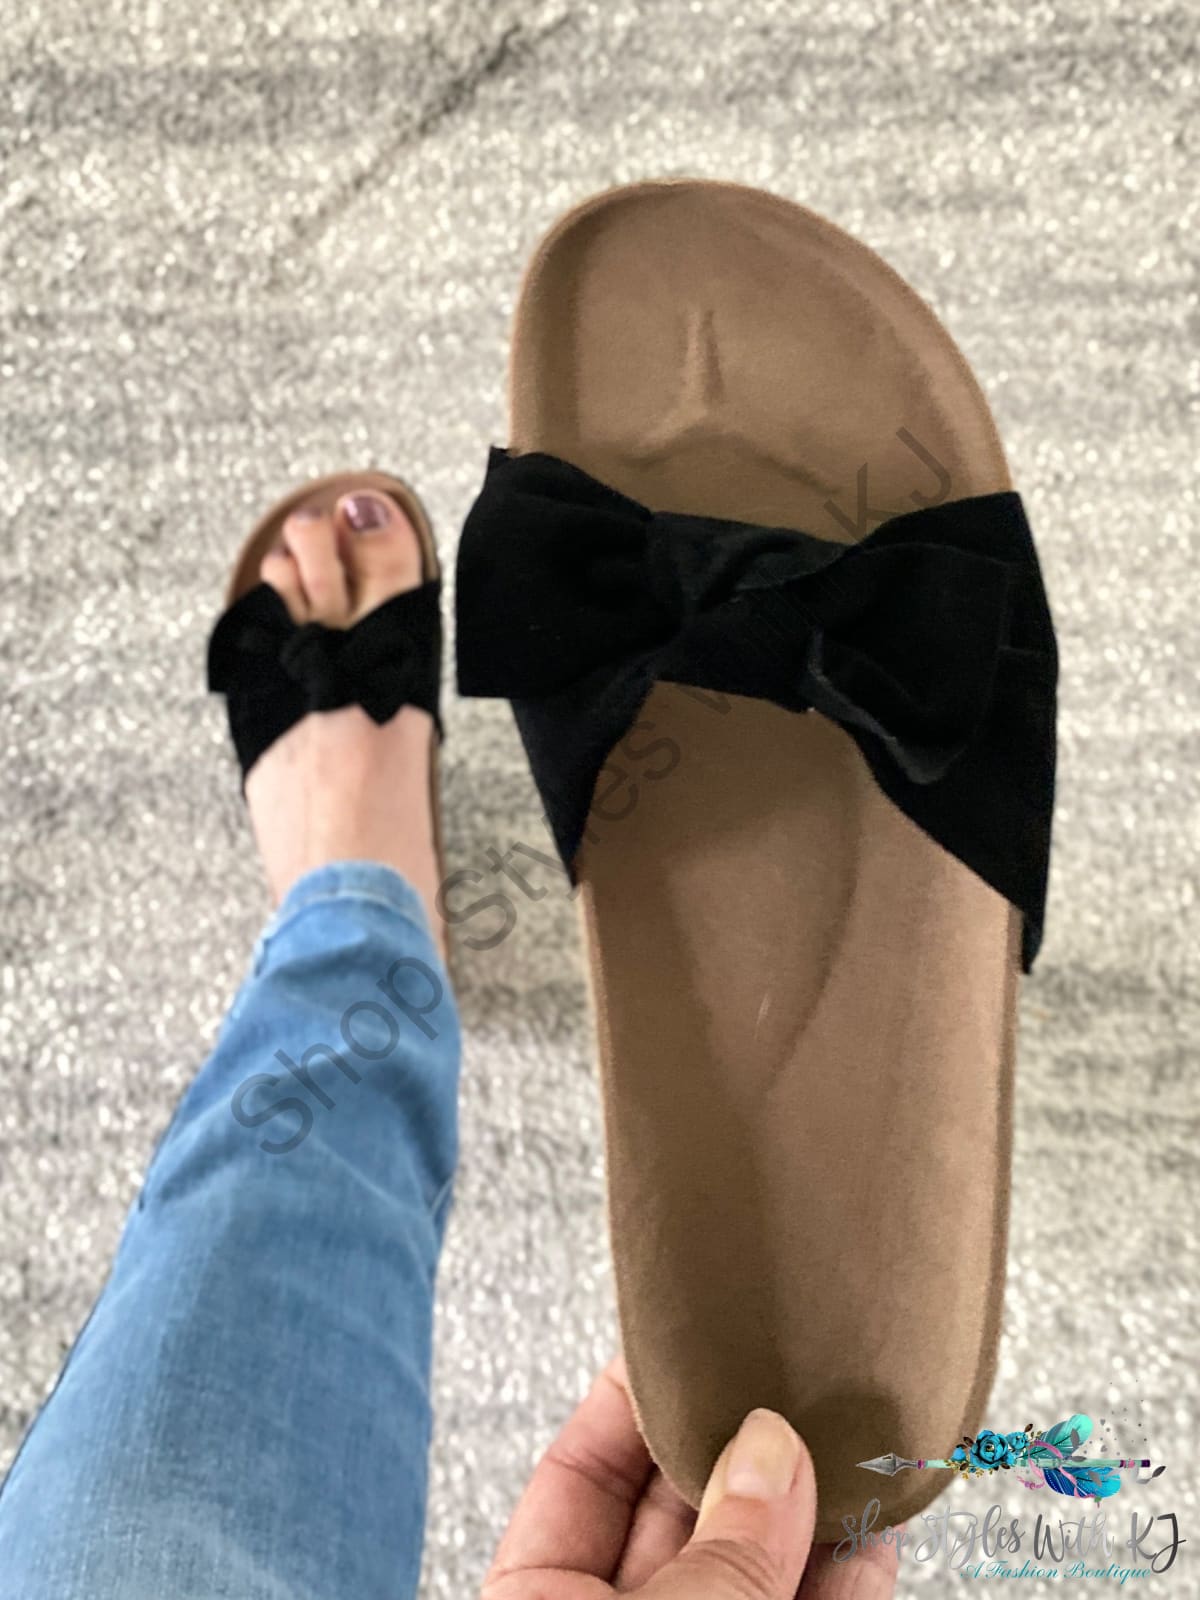 Beauty And Bows Sandals Julia Rose